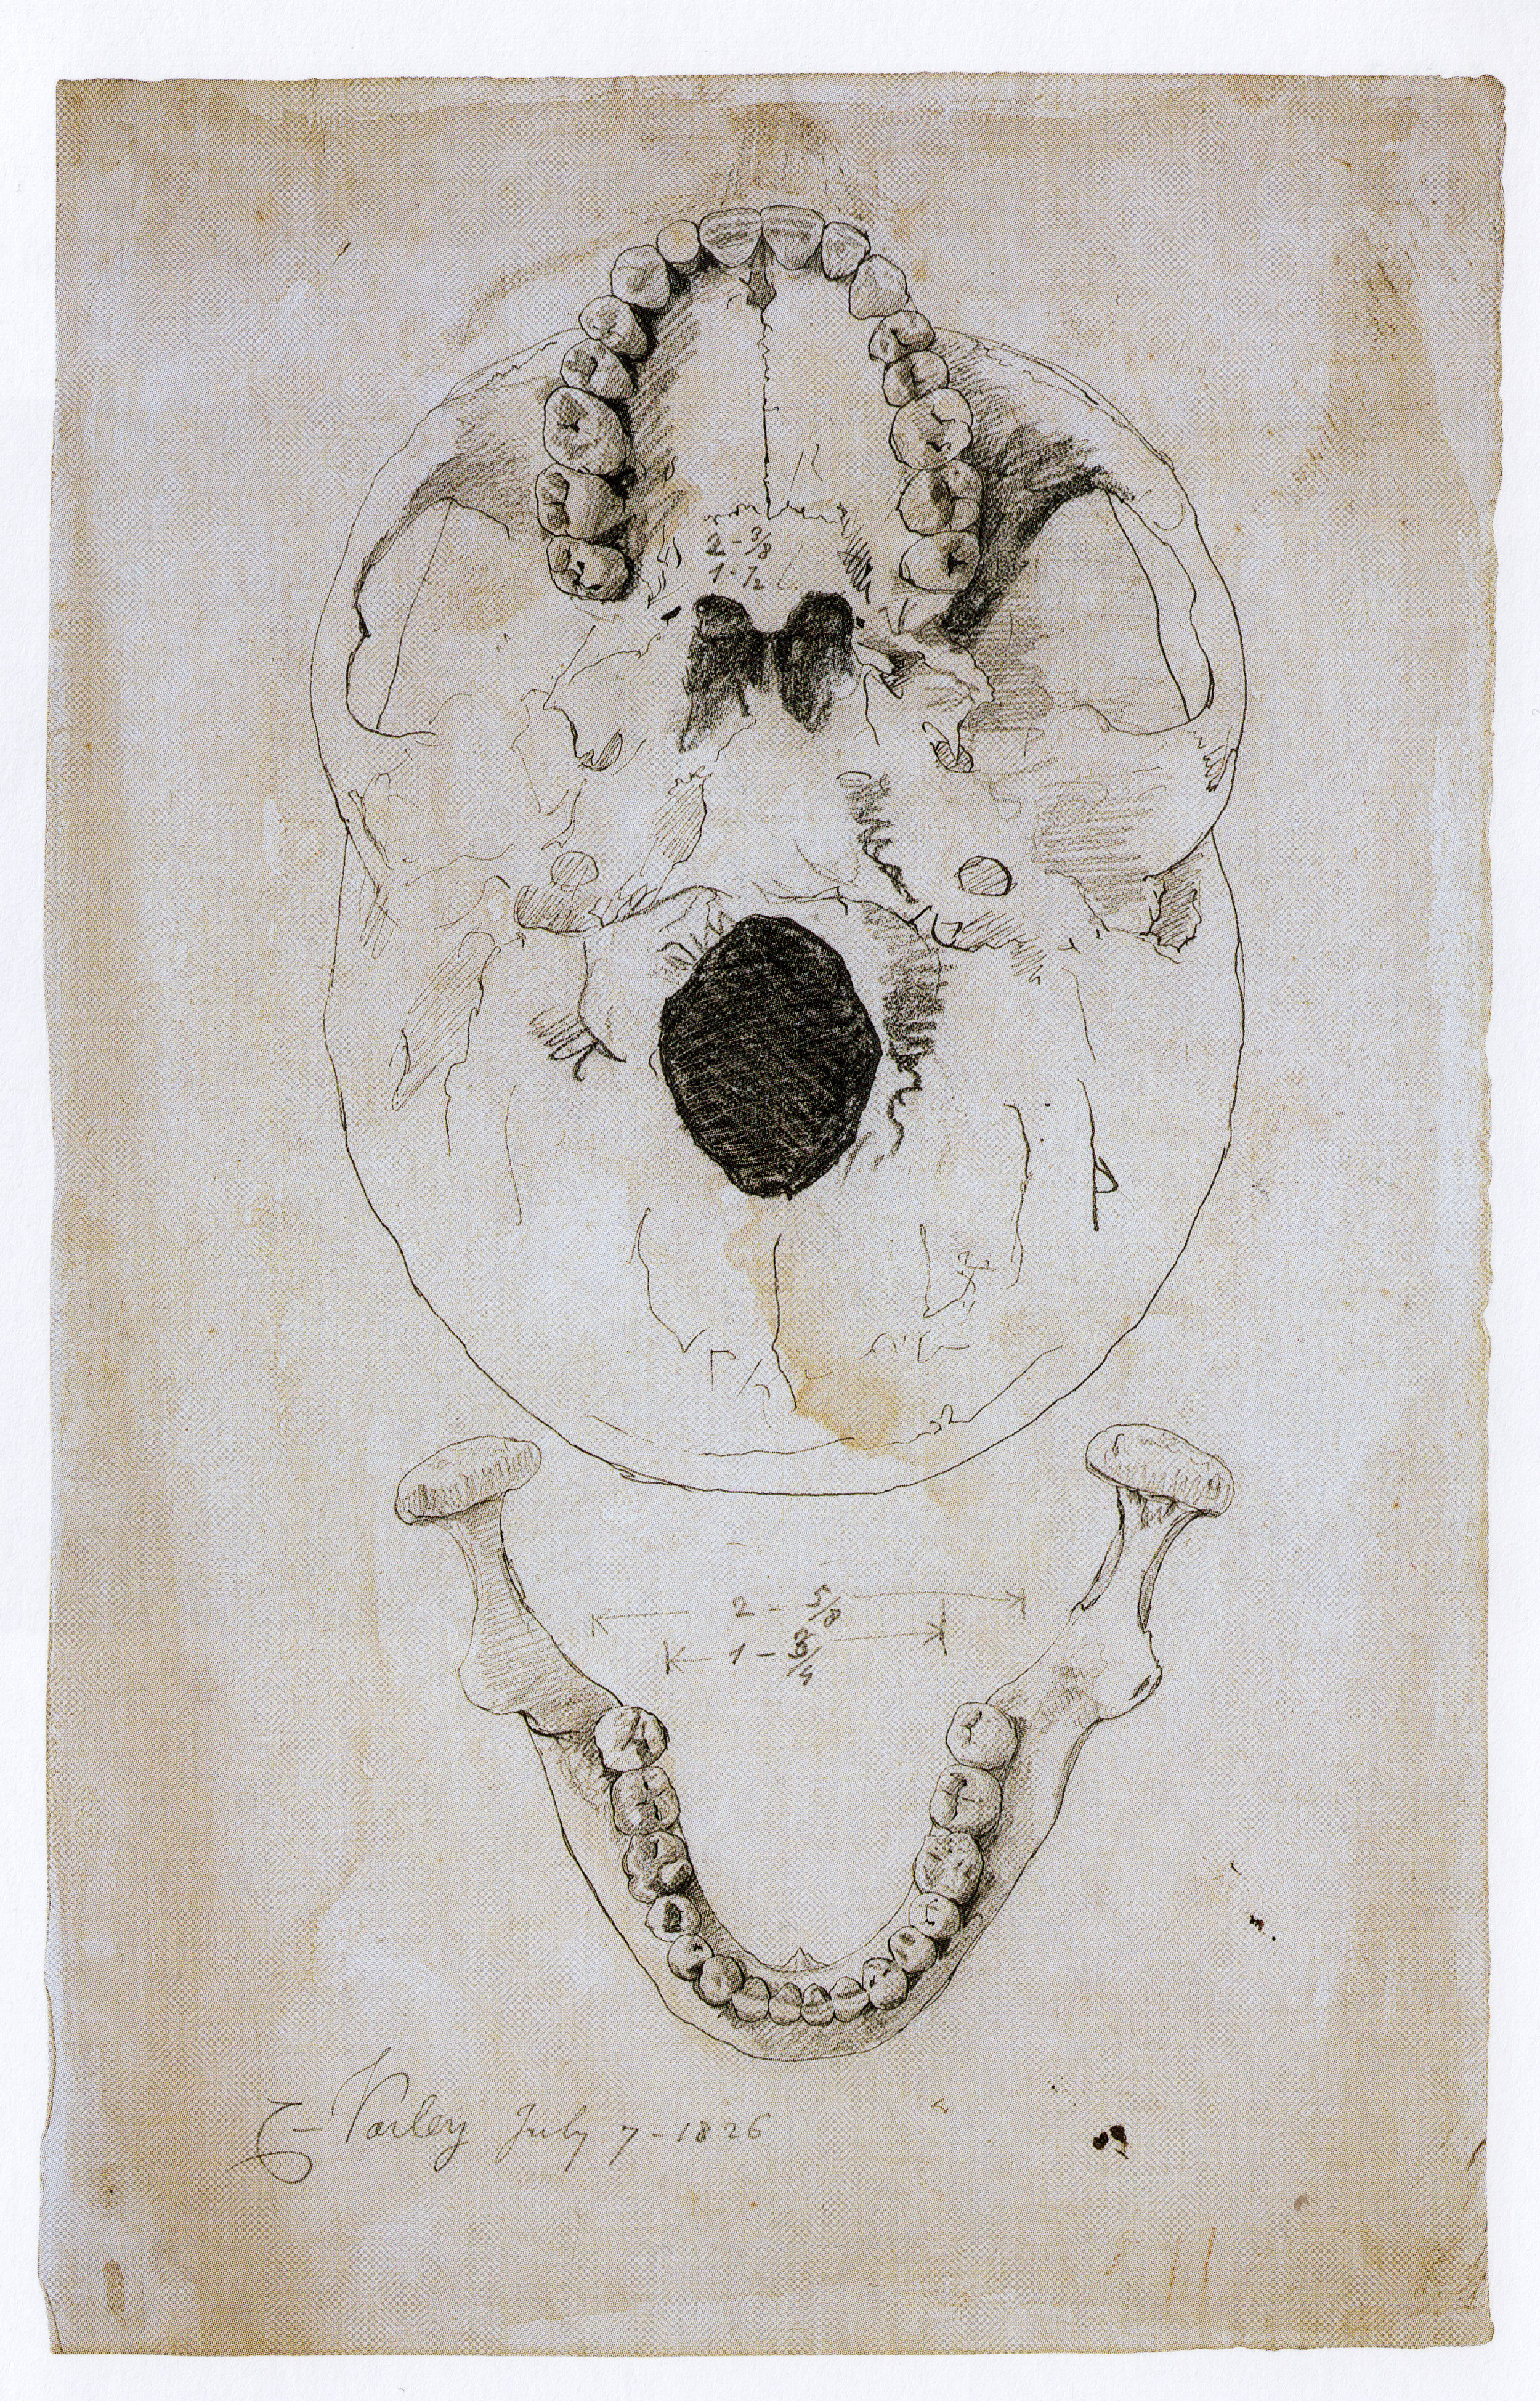  Cornelius Varley, Measured Drawing of Skull (1826). Made to demonstrate the Patent Graphic Telescope’s ability to execute precise, measured drawing. 